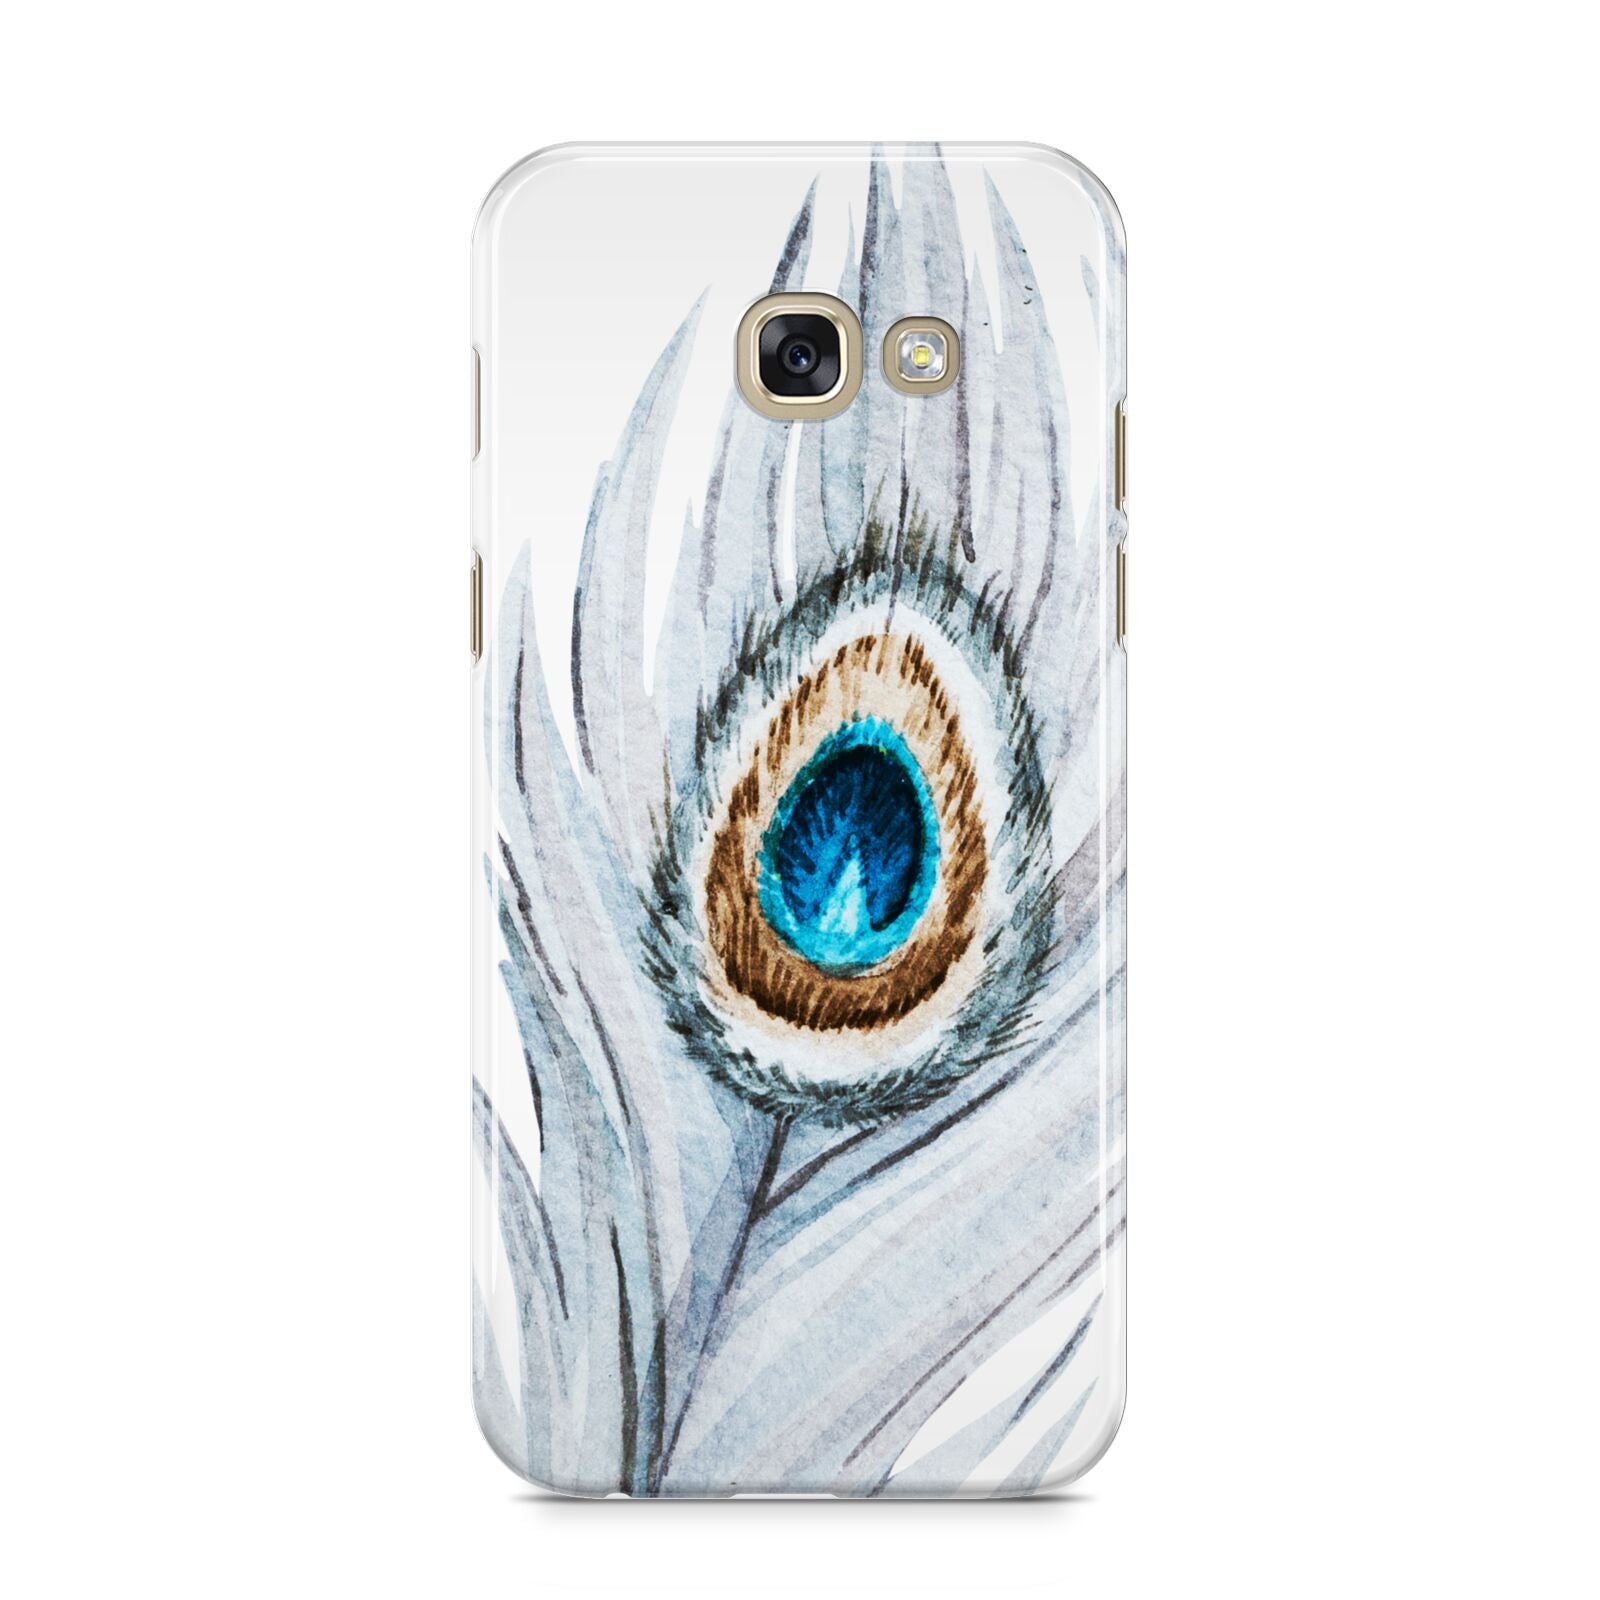 Peacock Samsung Galaxy A5 2017 Case on gold phone